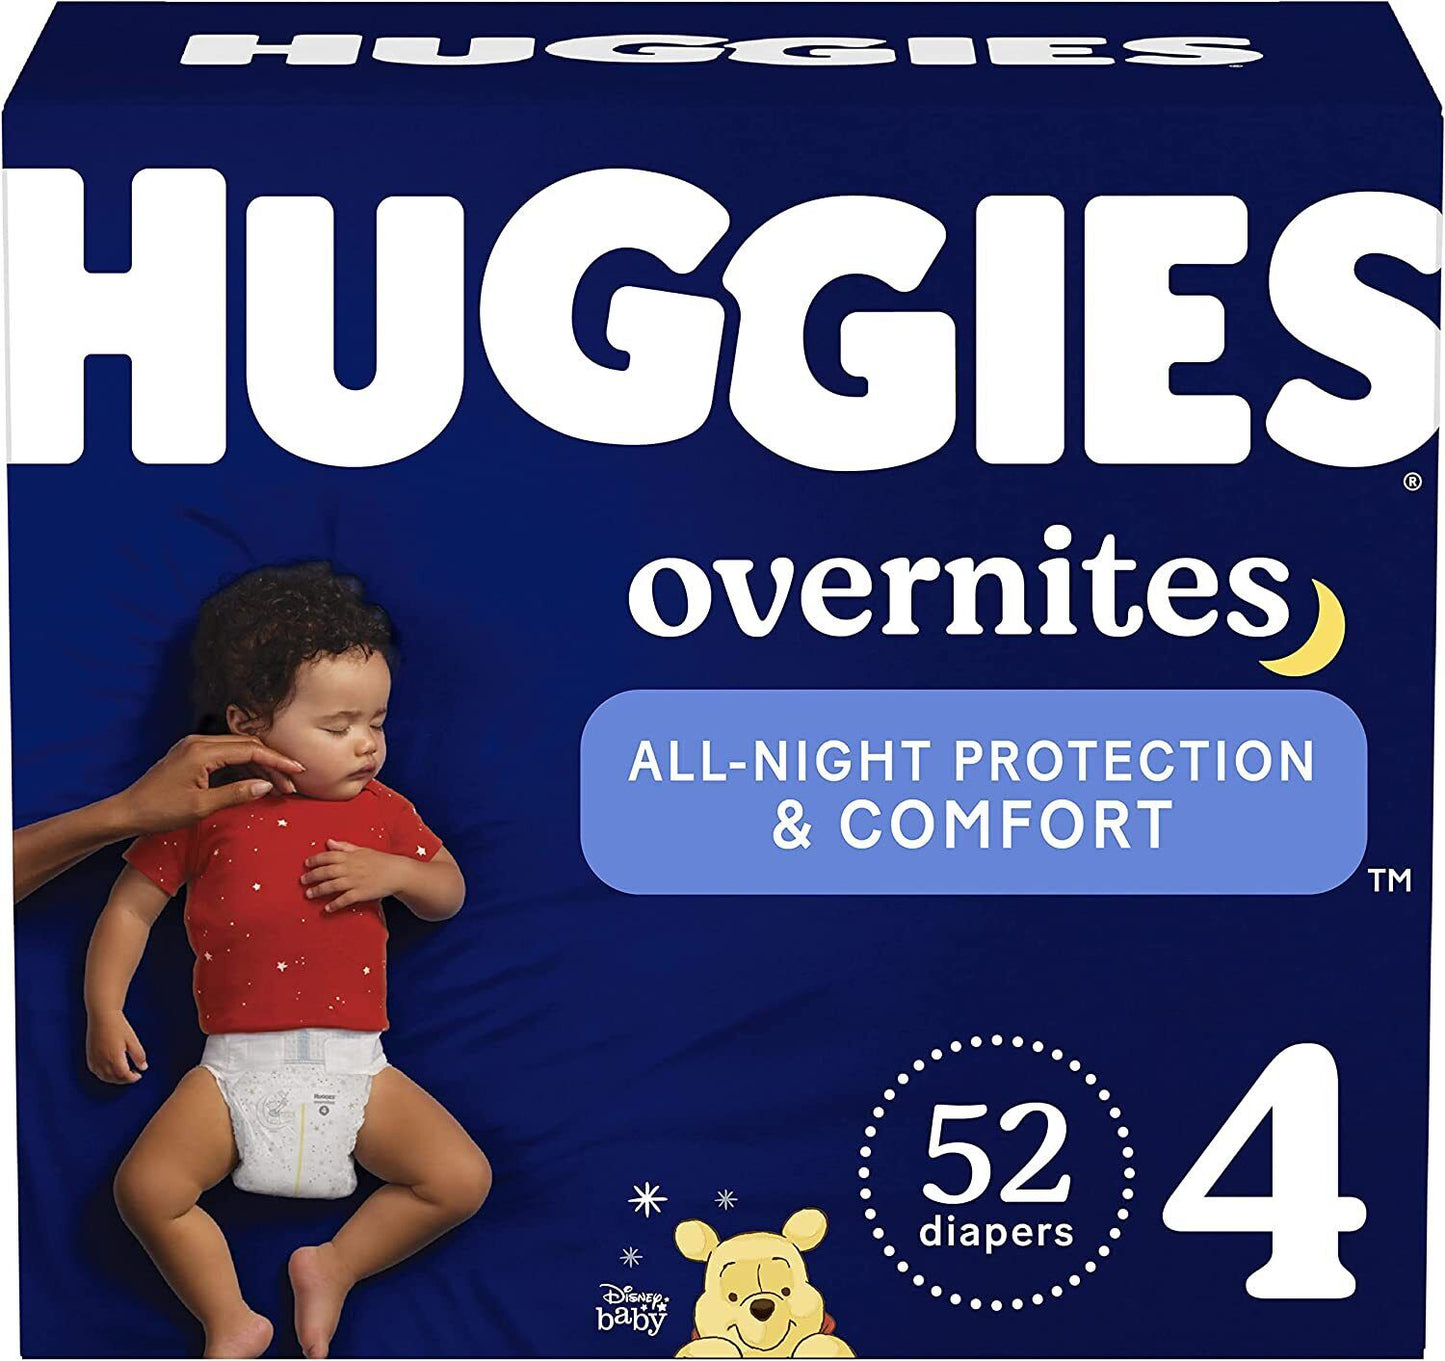 Huggies Overnites Nighttime Disposable Baby Diapers, Size 3, 4, 5, 6